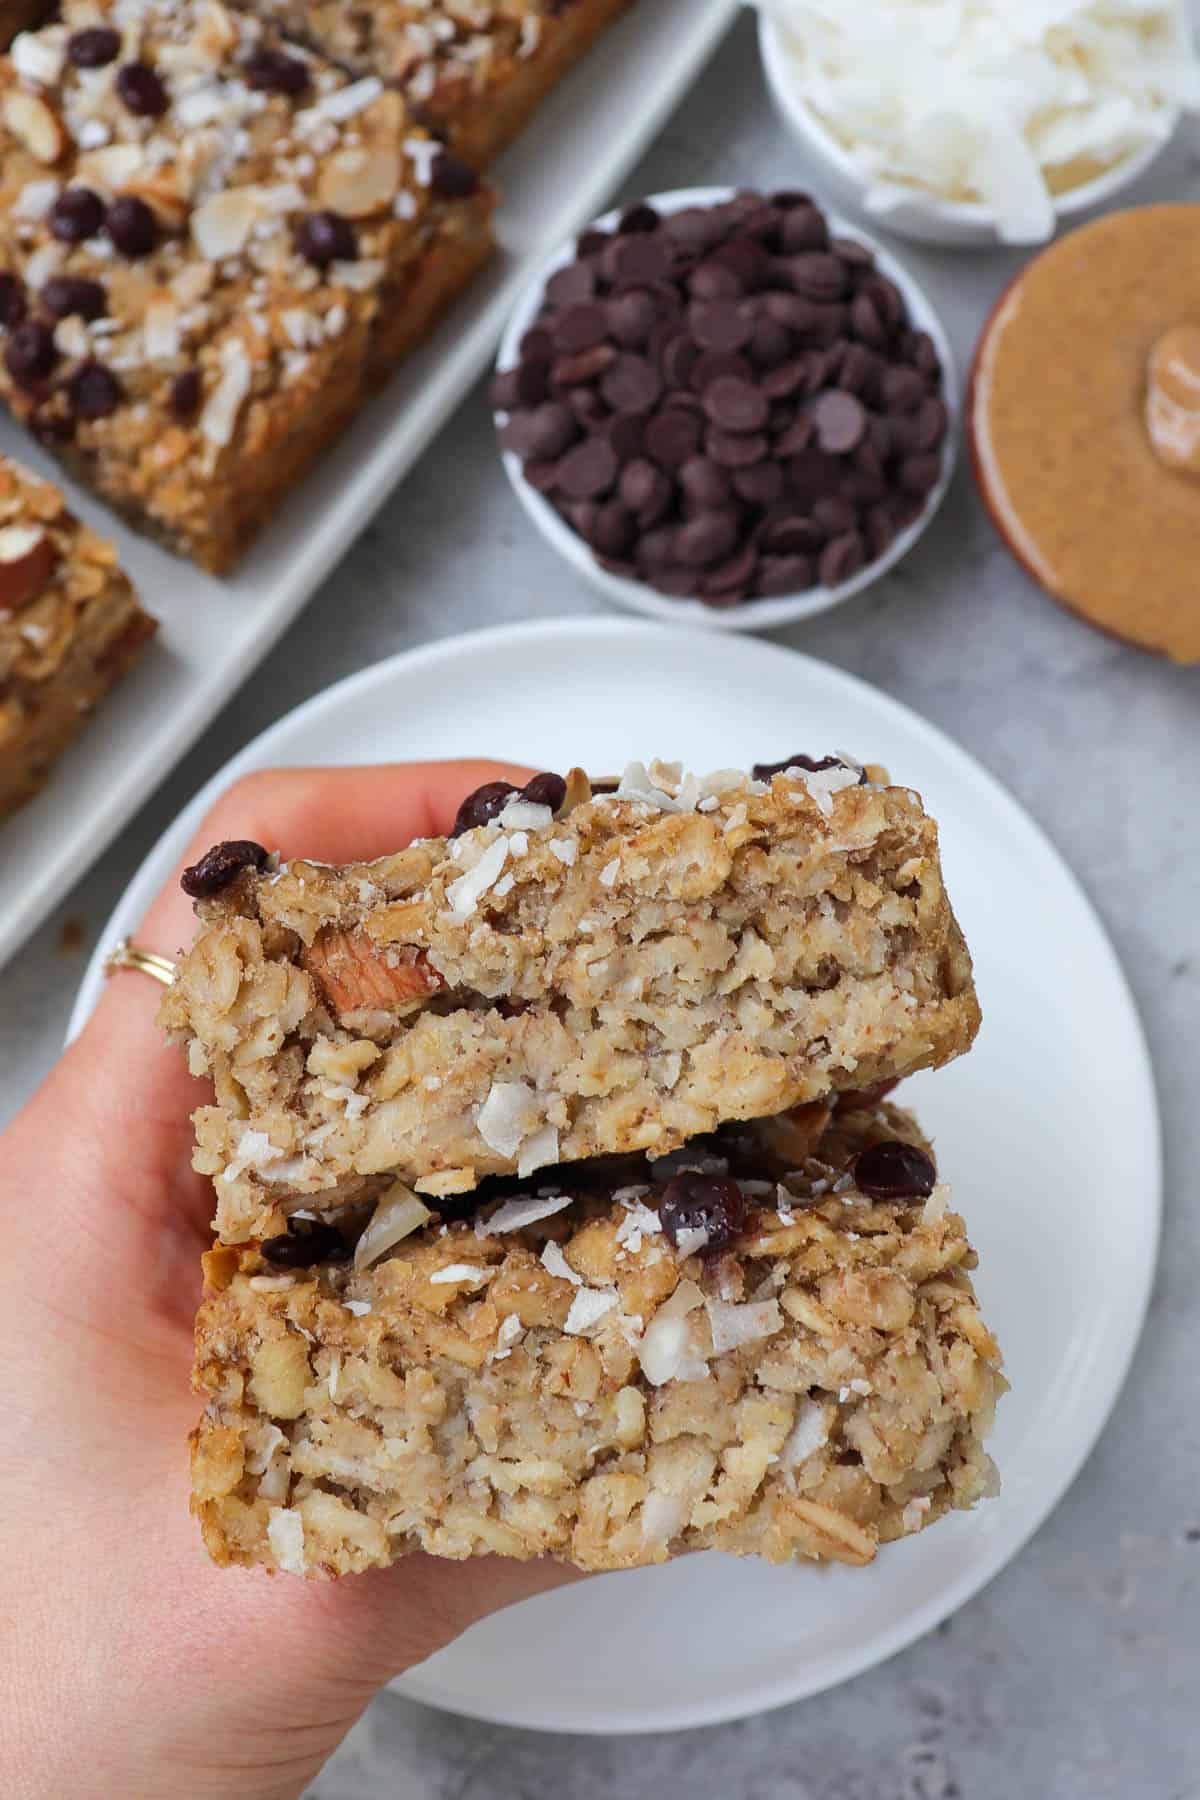 Holding oatmeal bars in hand for side view.